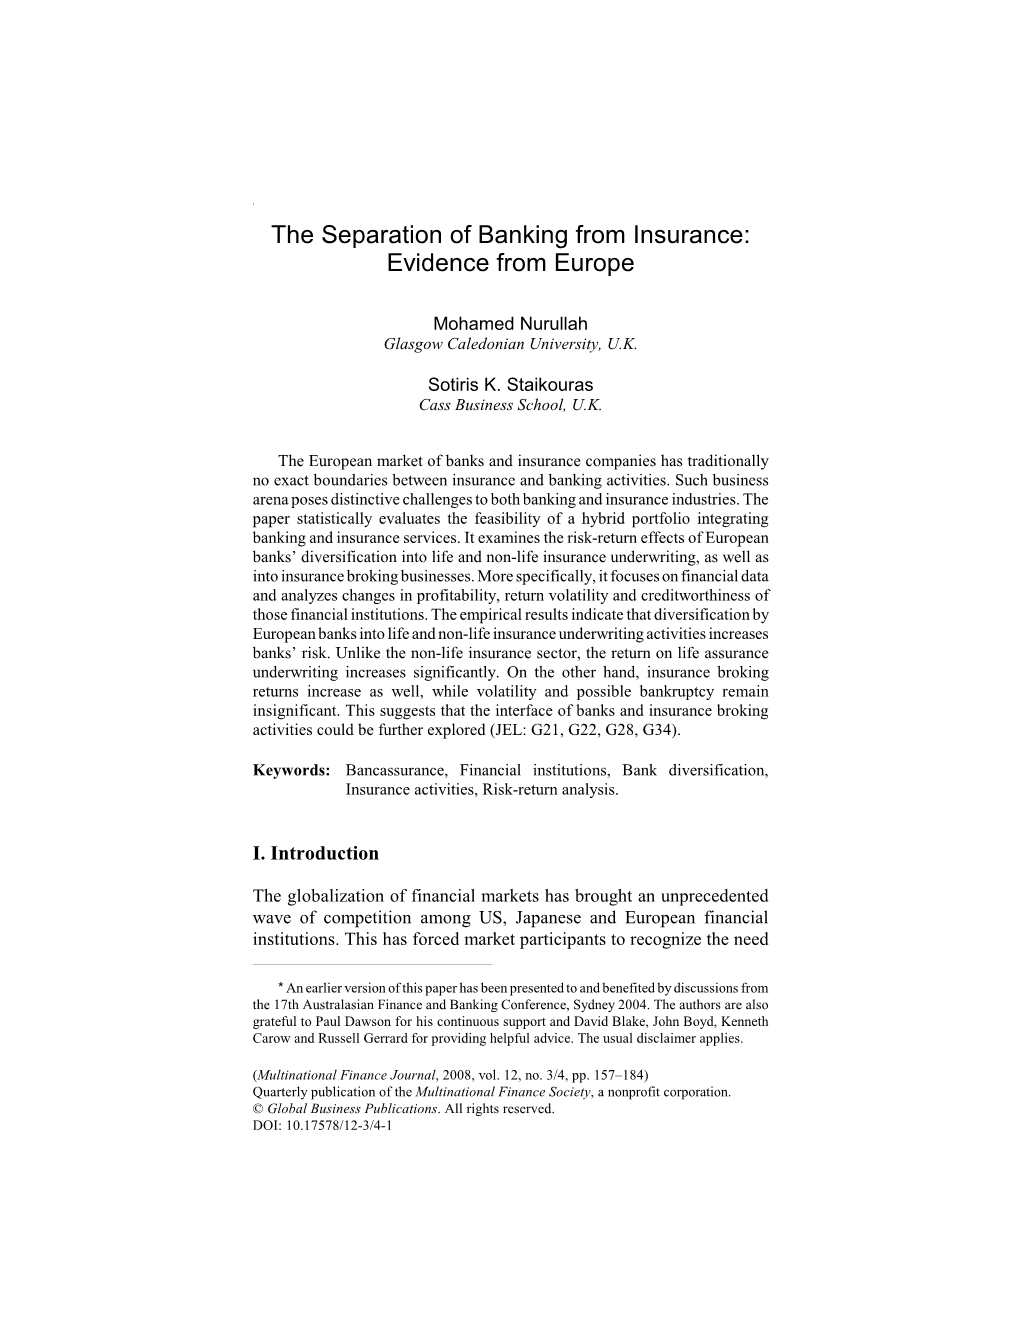 The Separation of Banking from Insurance: Evidence from Europe